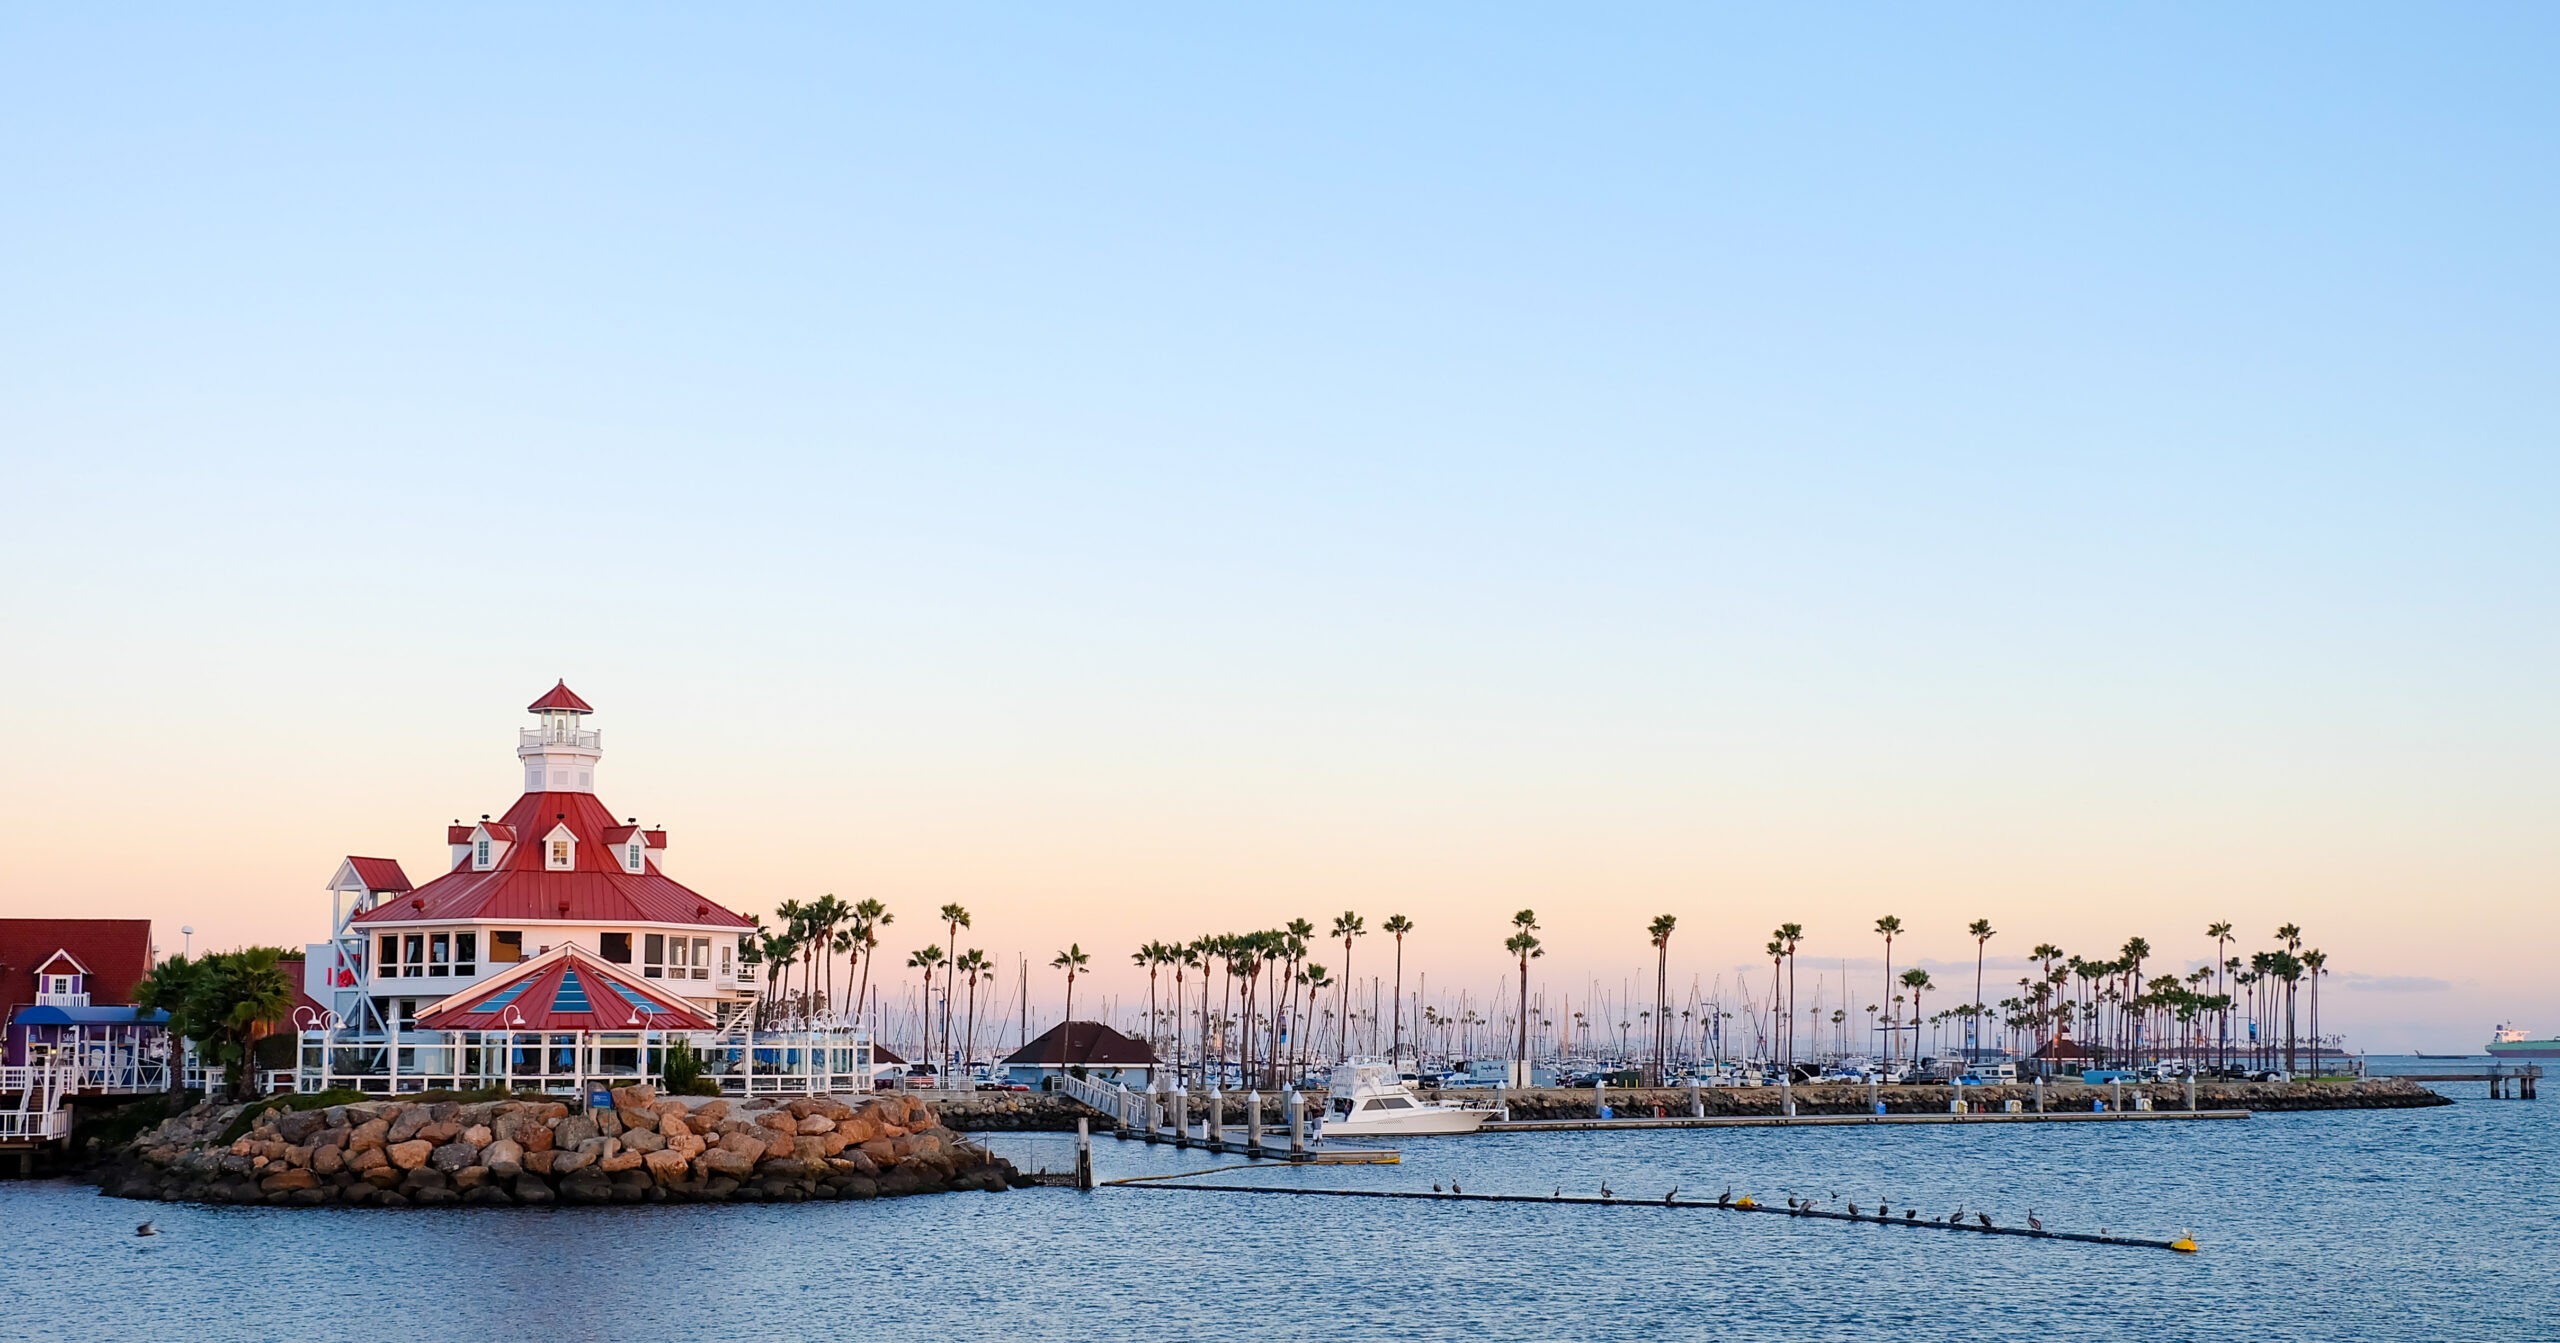 Fun ideas to do in Long Beach to break up your routine